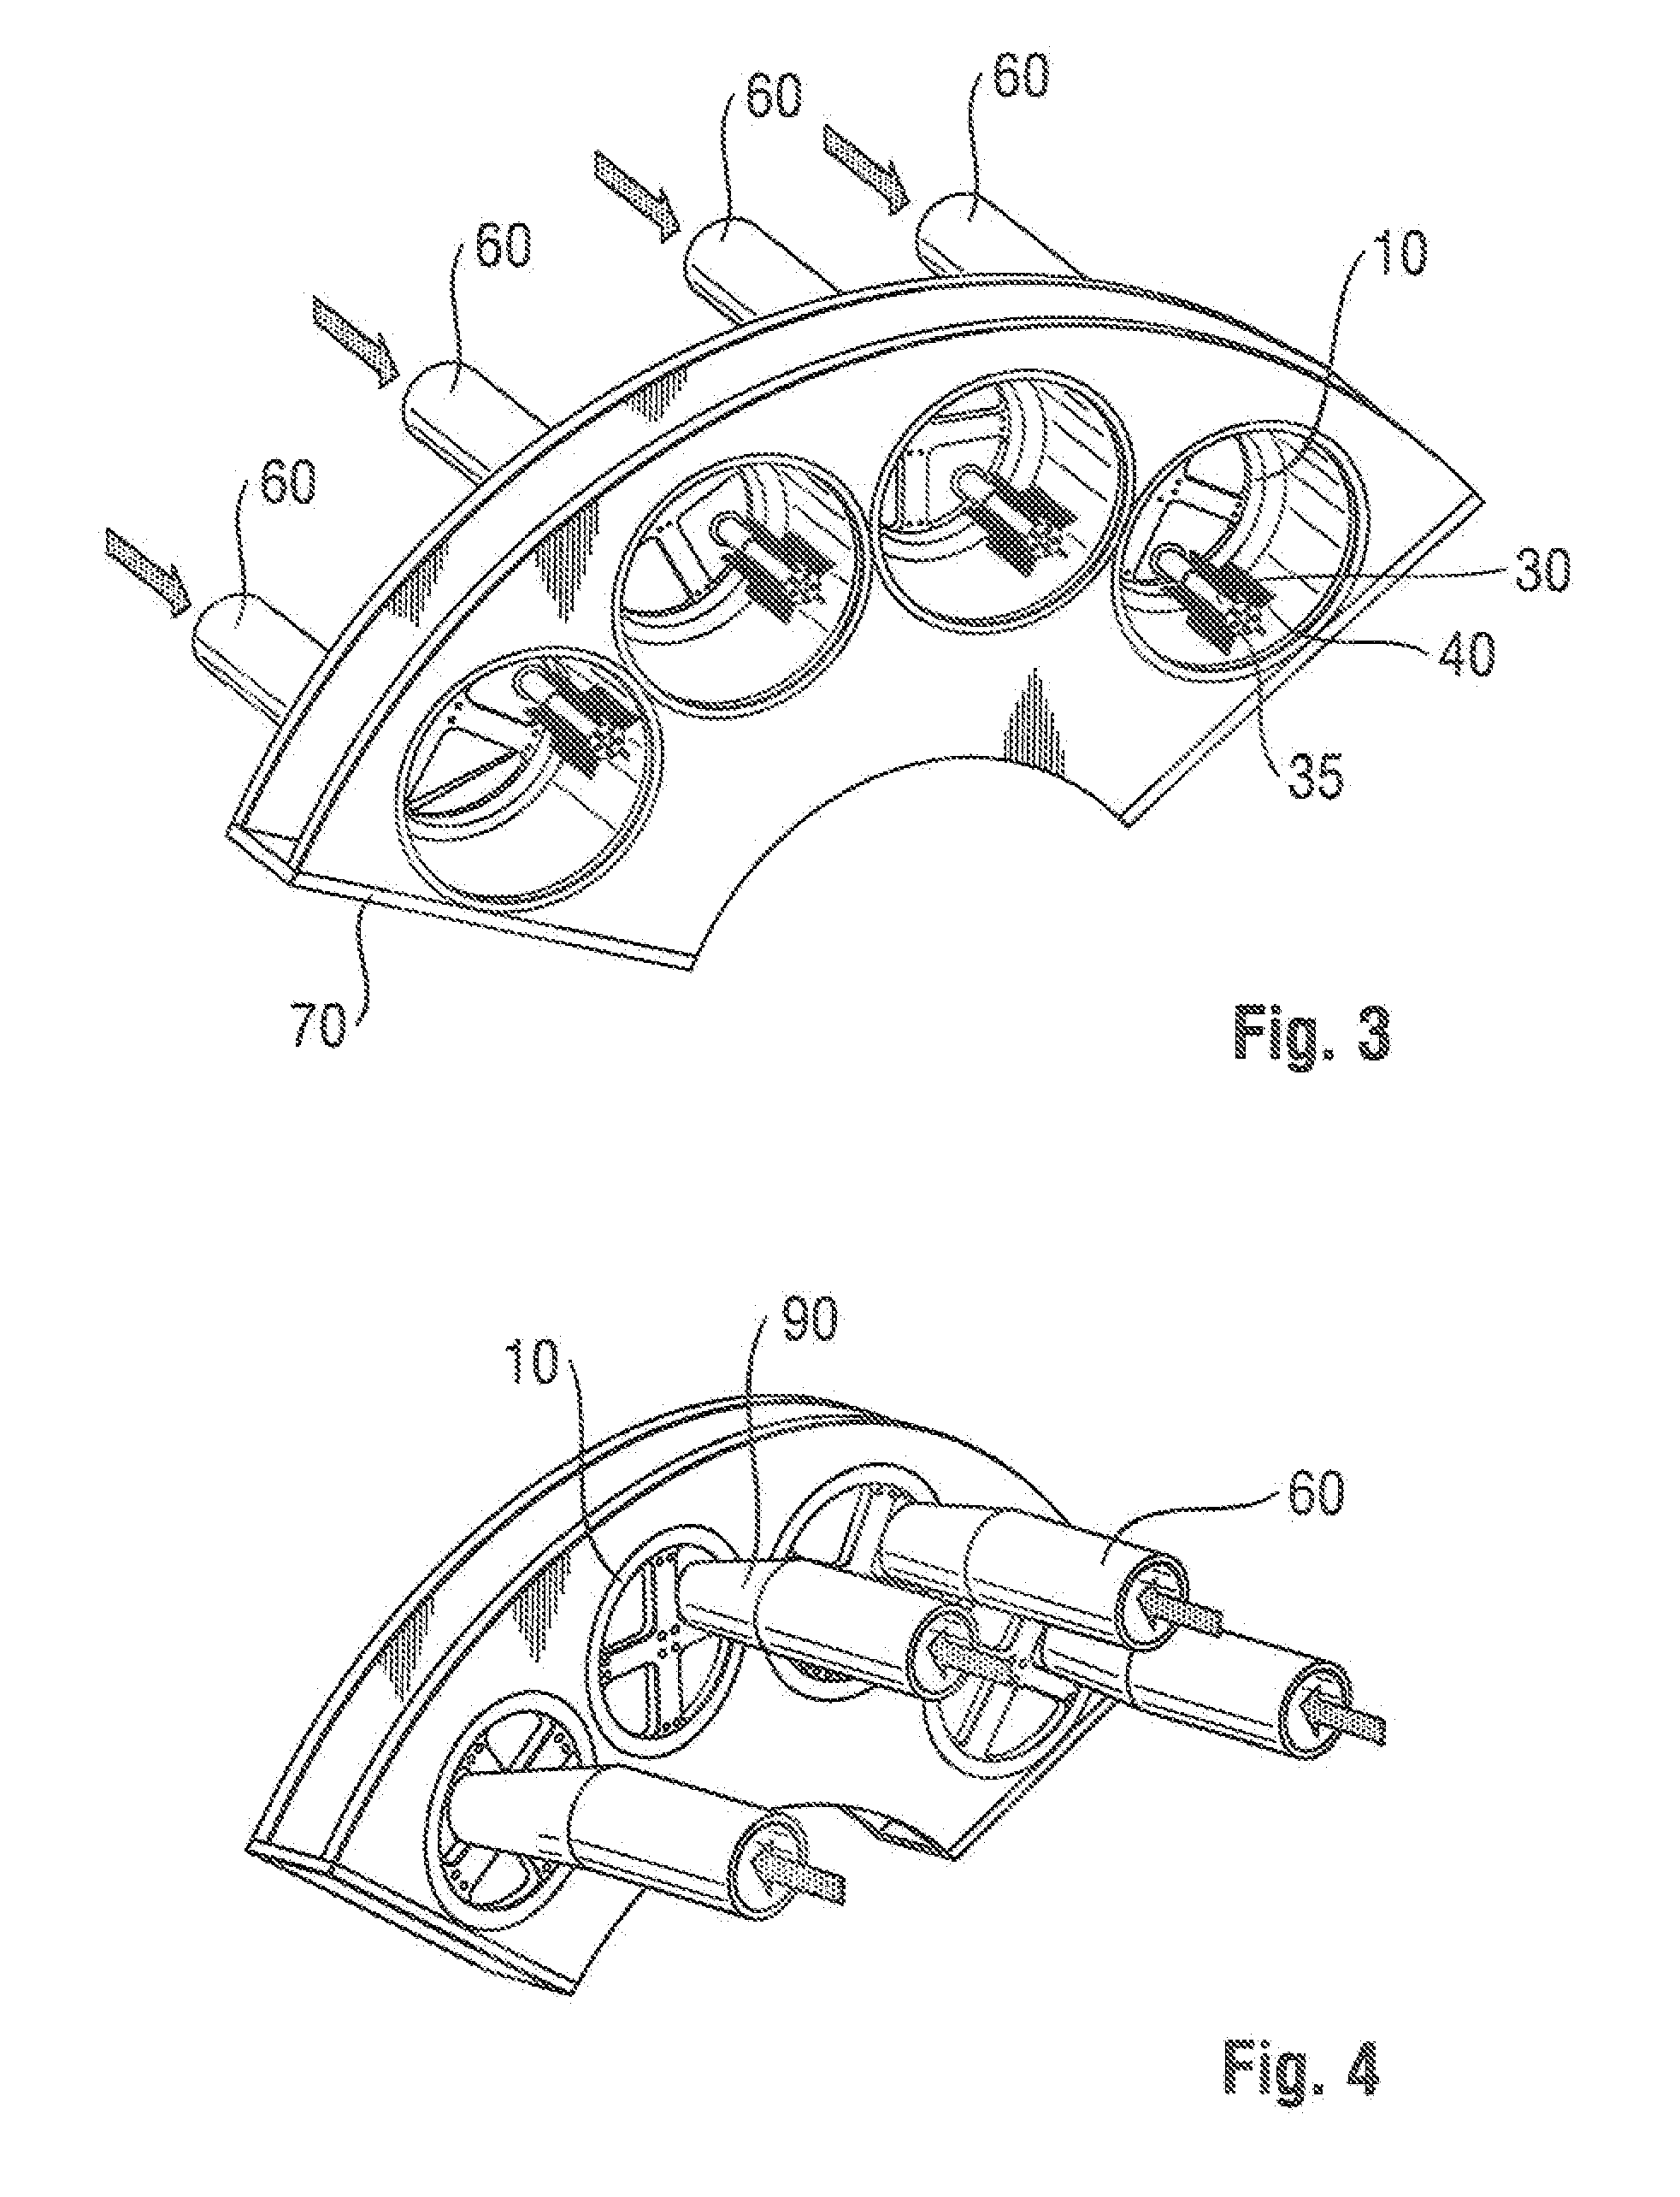 Fiber air-laying process for fibrous structures suitable for use in absorbent articles